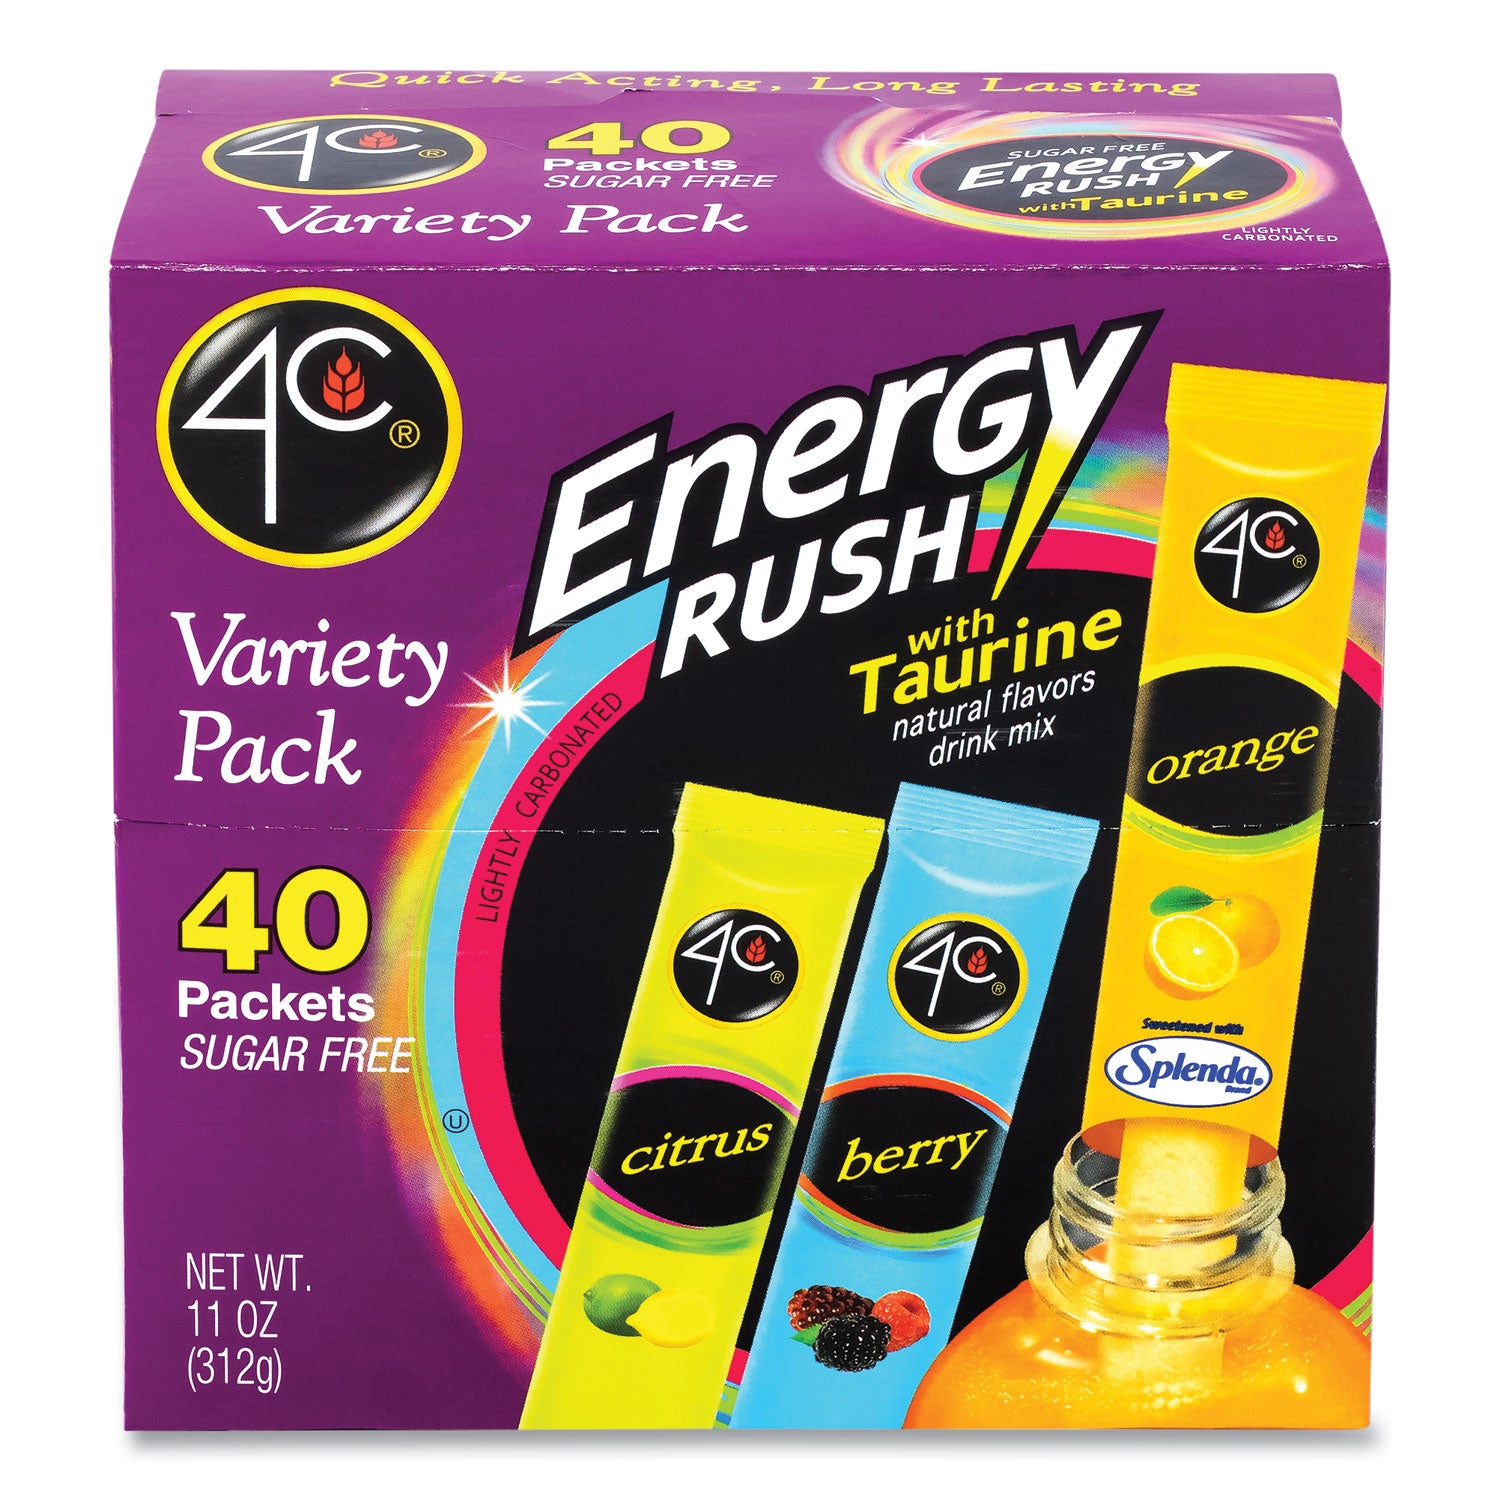 energy-rush-sugar-free-drink-mix-with-taurine-variety-pack-assorted-028-oz-packet-40-carton-ships-in-1-3-business-days_grr22002037 - 2